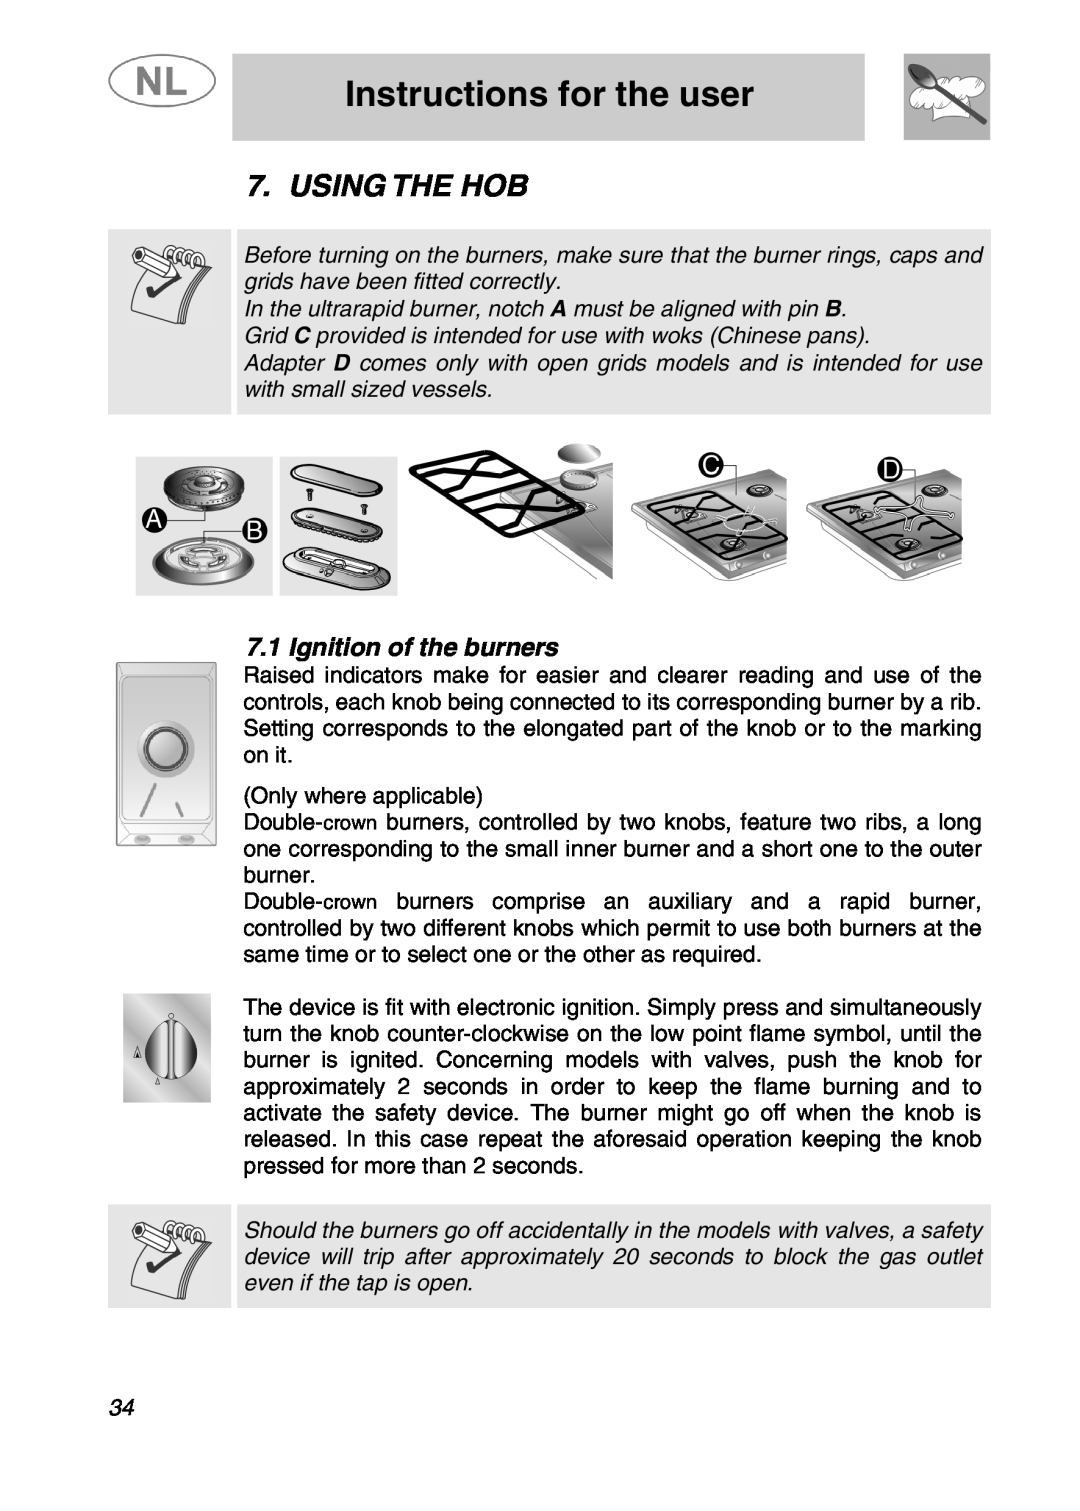 Smeg SLRV596X1 manual Instructions for the user, Using The Hob, Ignition of the burners 